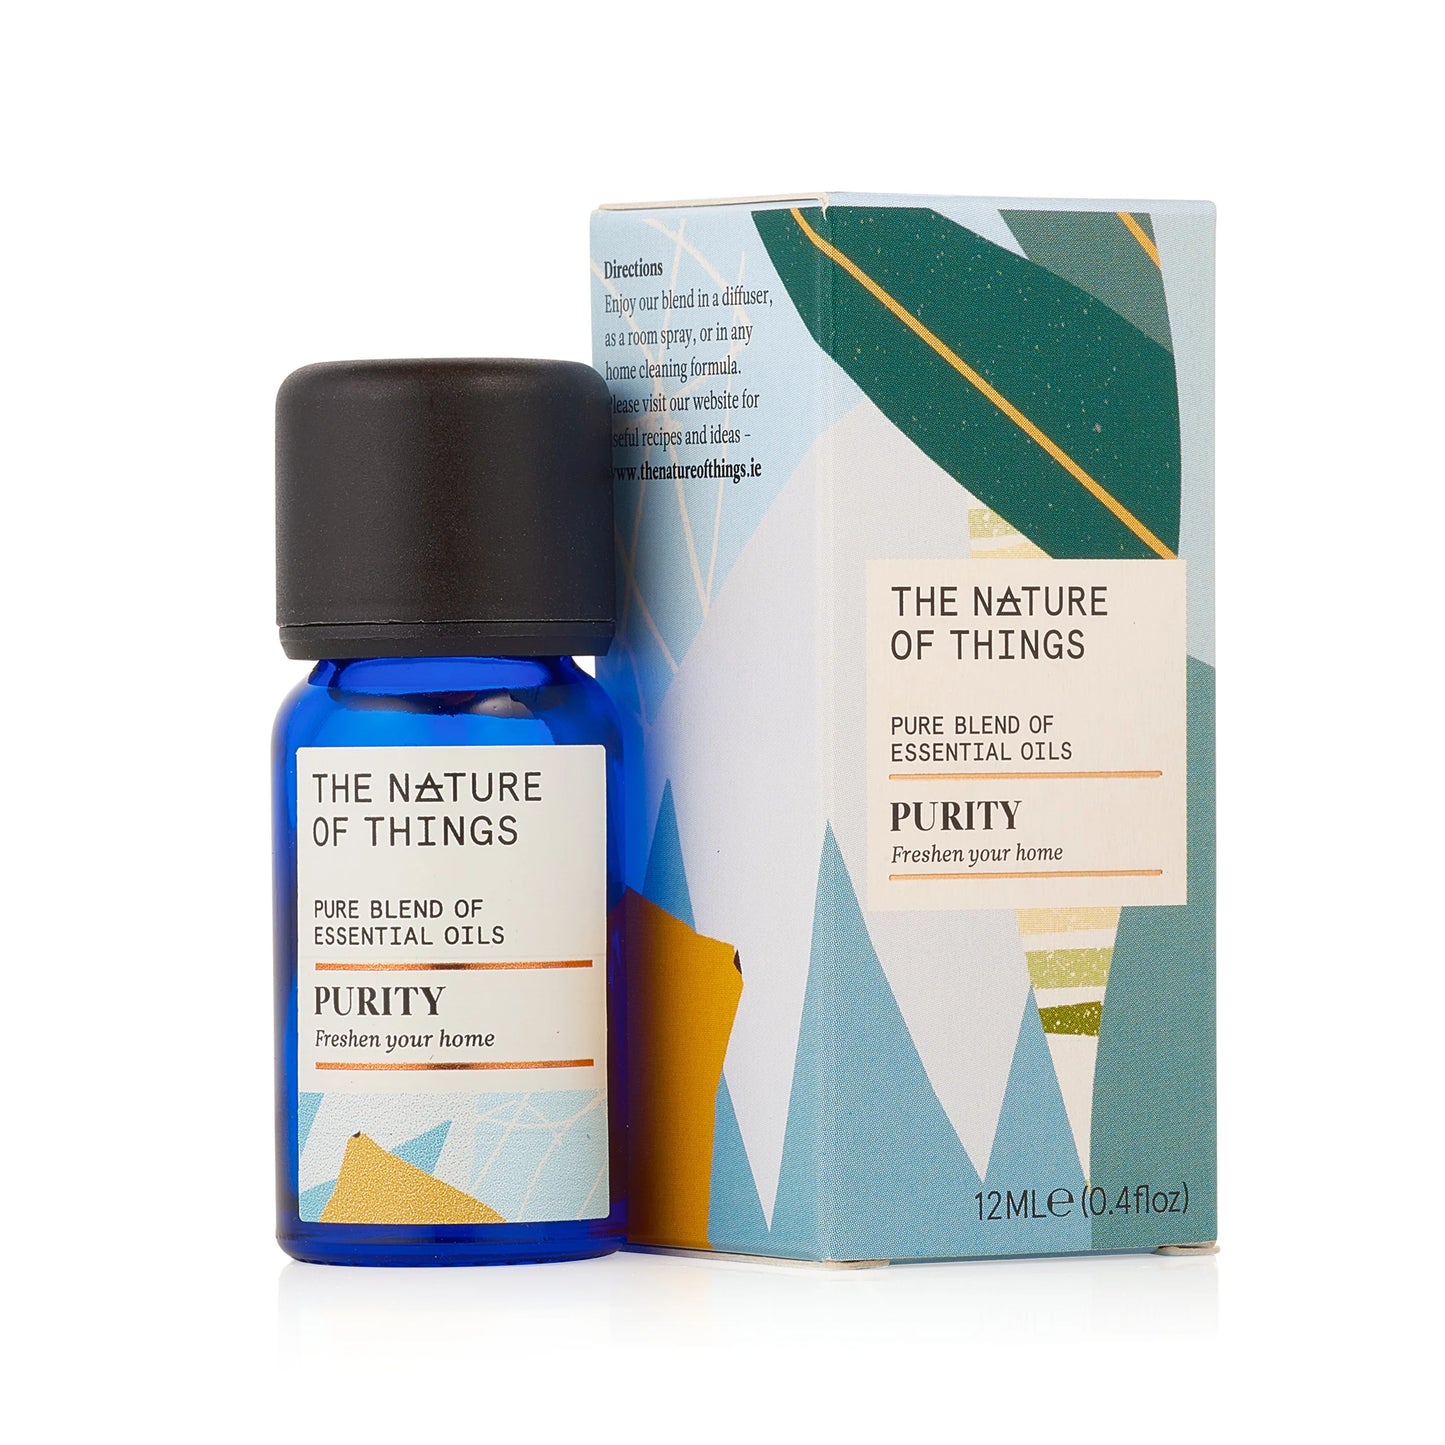 The Nature of Things Purity Oil Blend